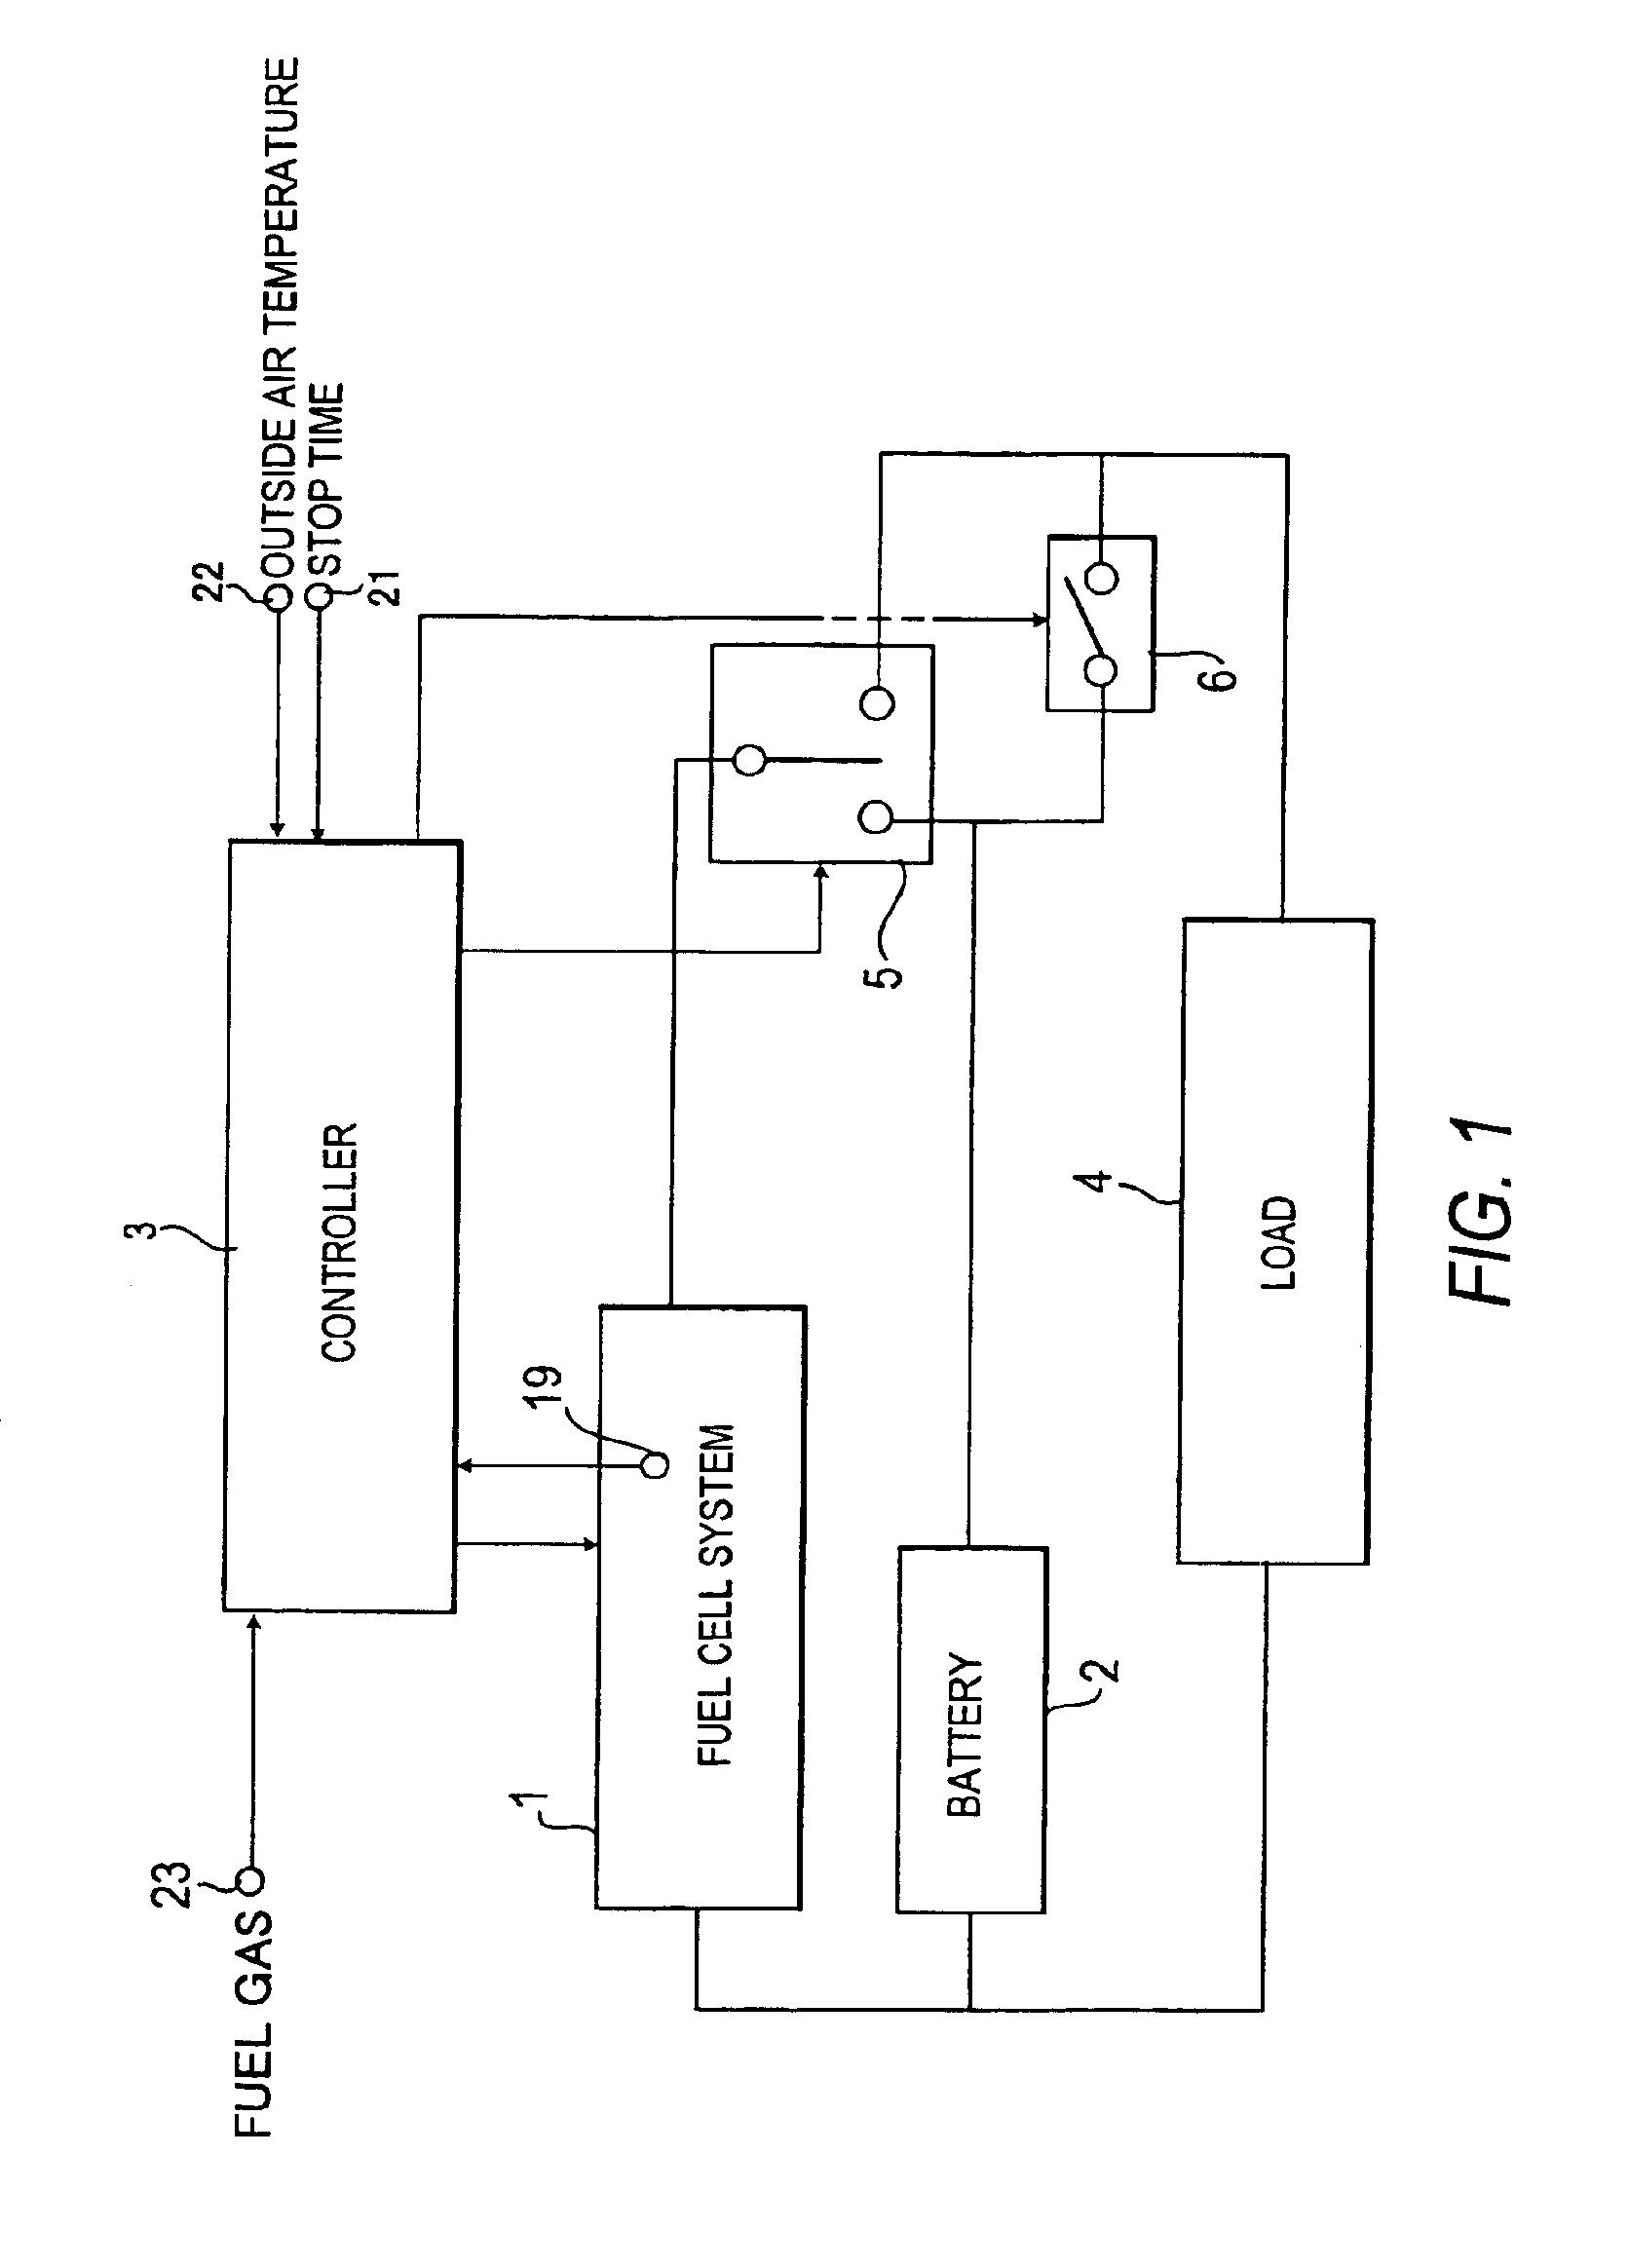 Fuel cell system and method of stopping the system